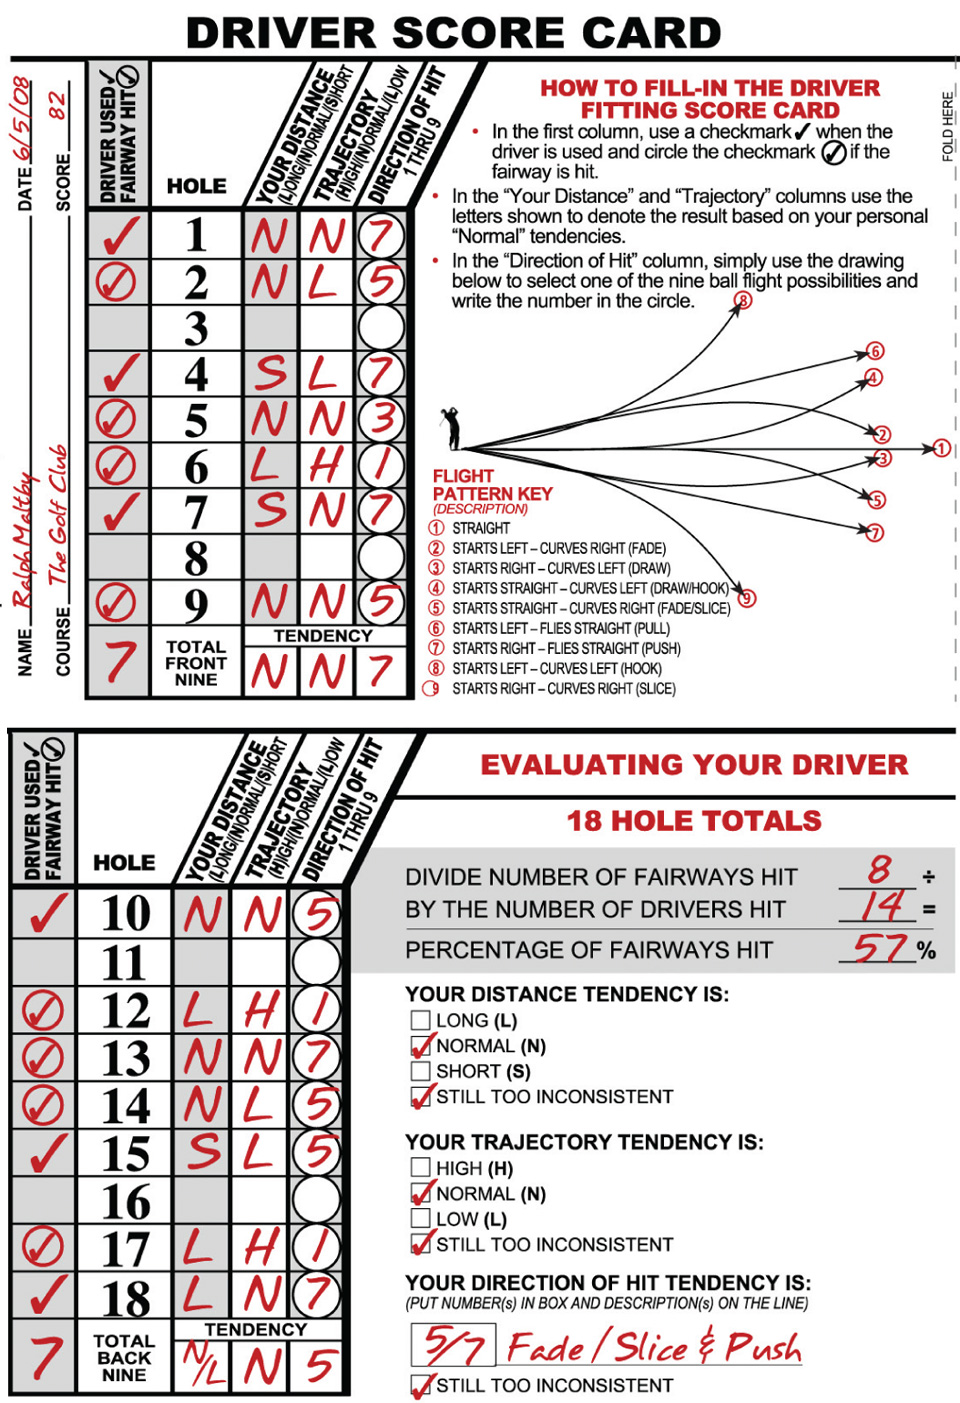 Driver Score Card Example